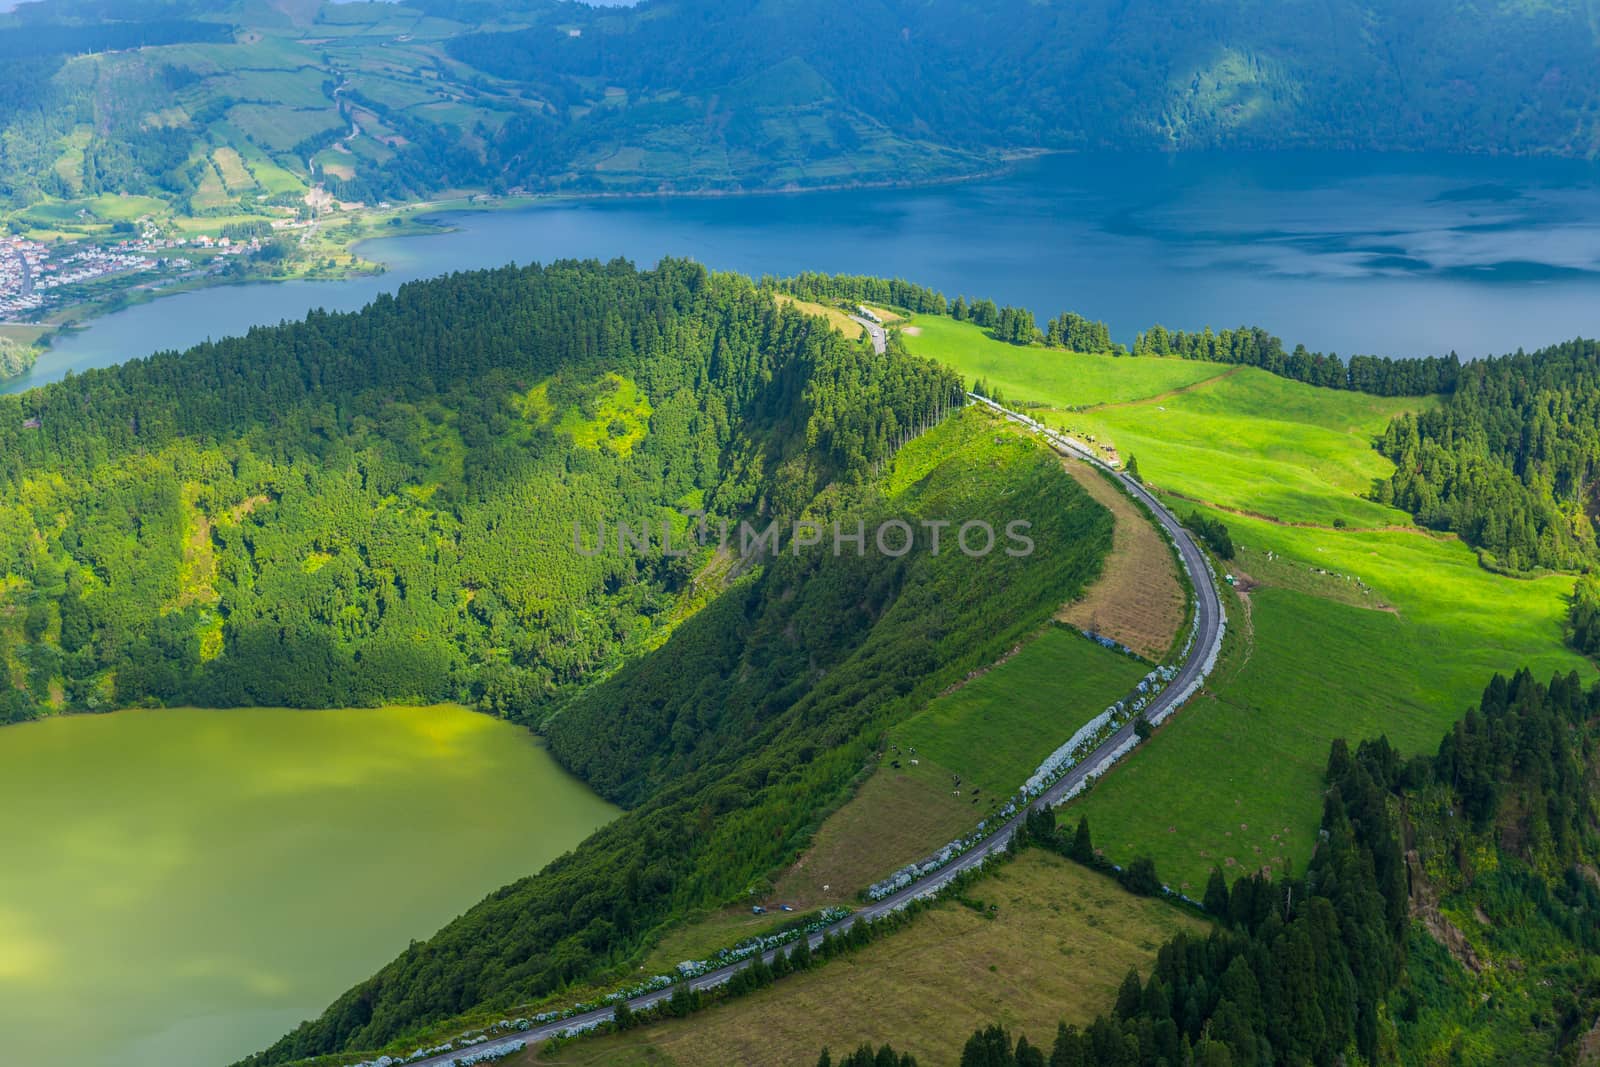 Sete Cidades from above by zittto